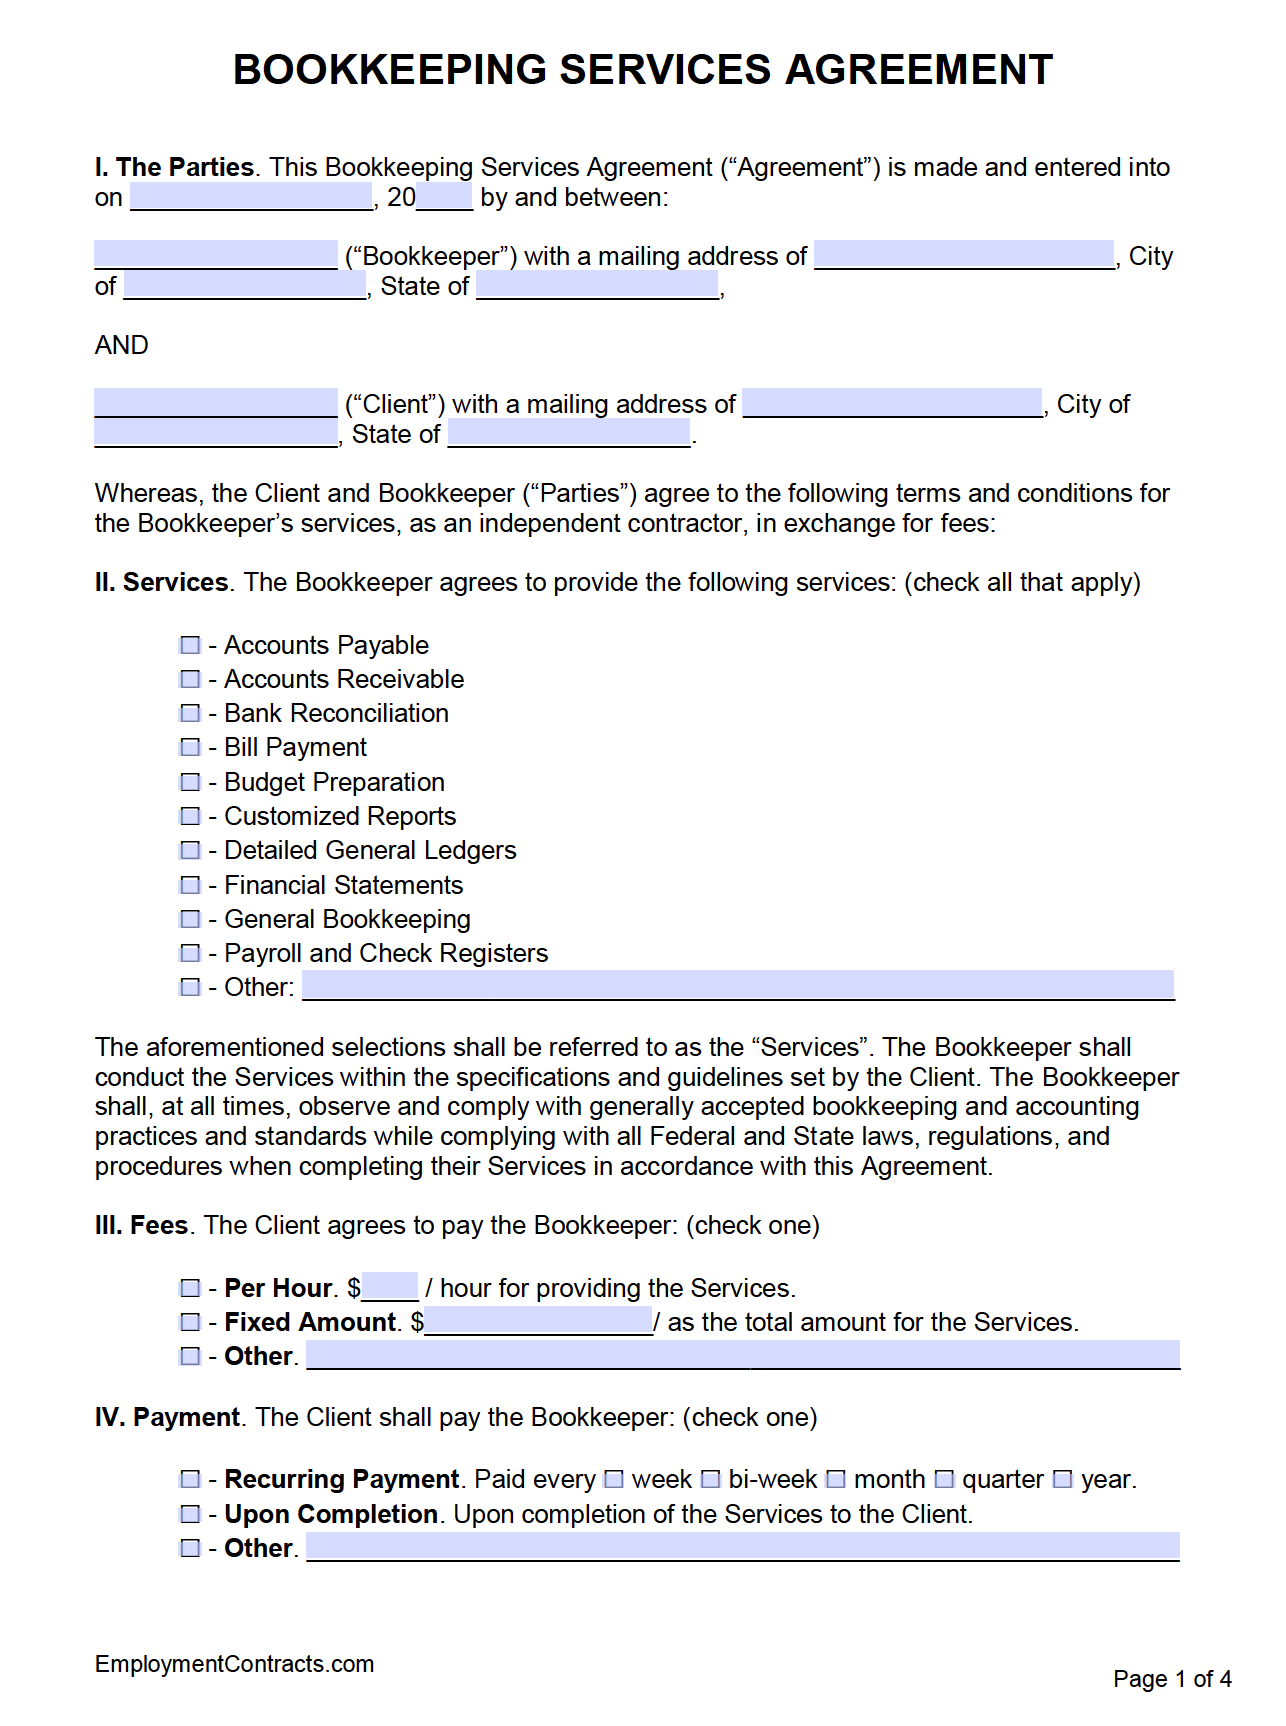 Bookkeeping Services Agreement Template PDF Word